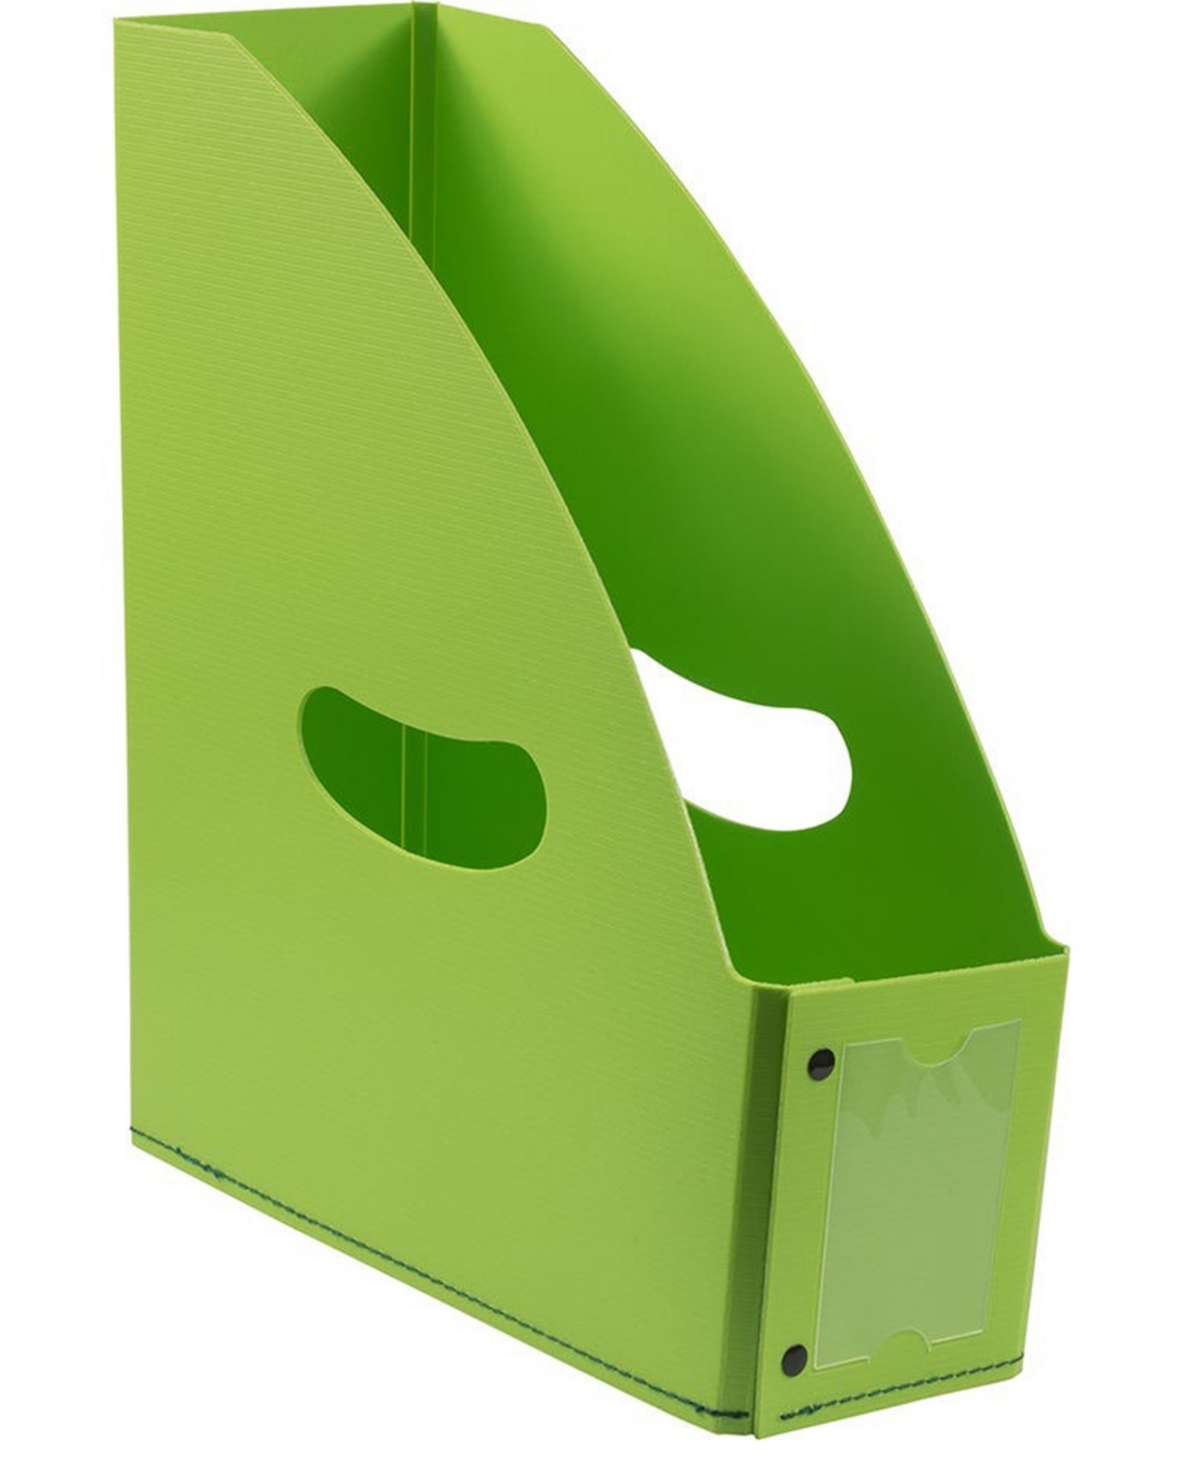 Plastic Magazine File Holder - 4 x 10.5 x 12 - Sold Individually - Lime Green